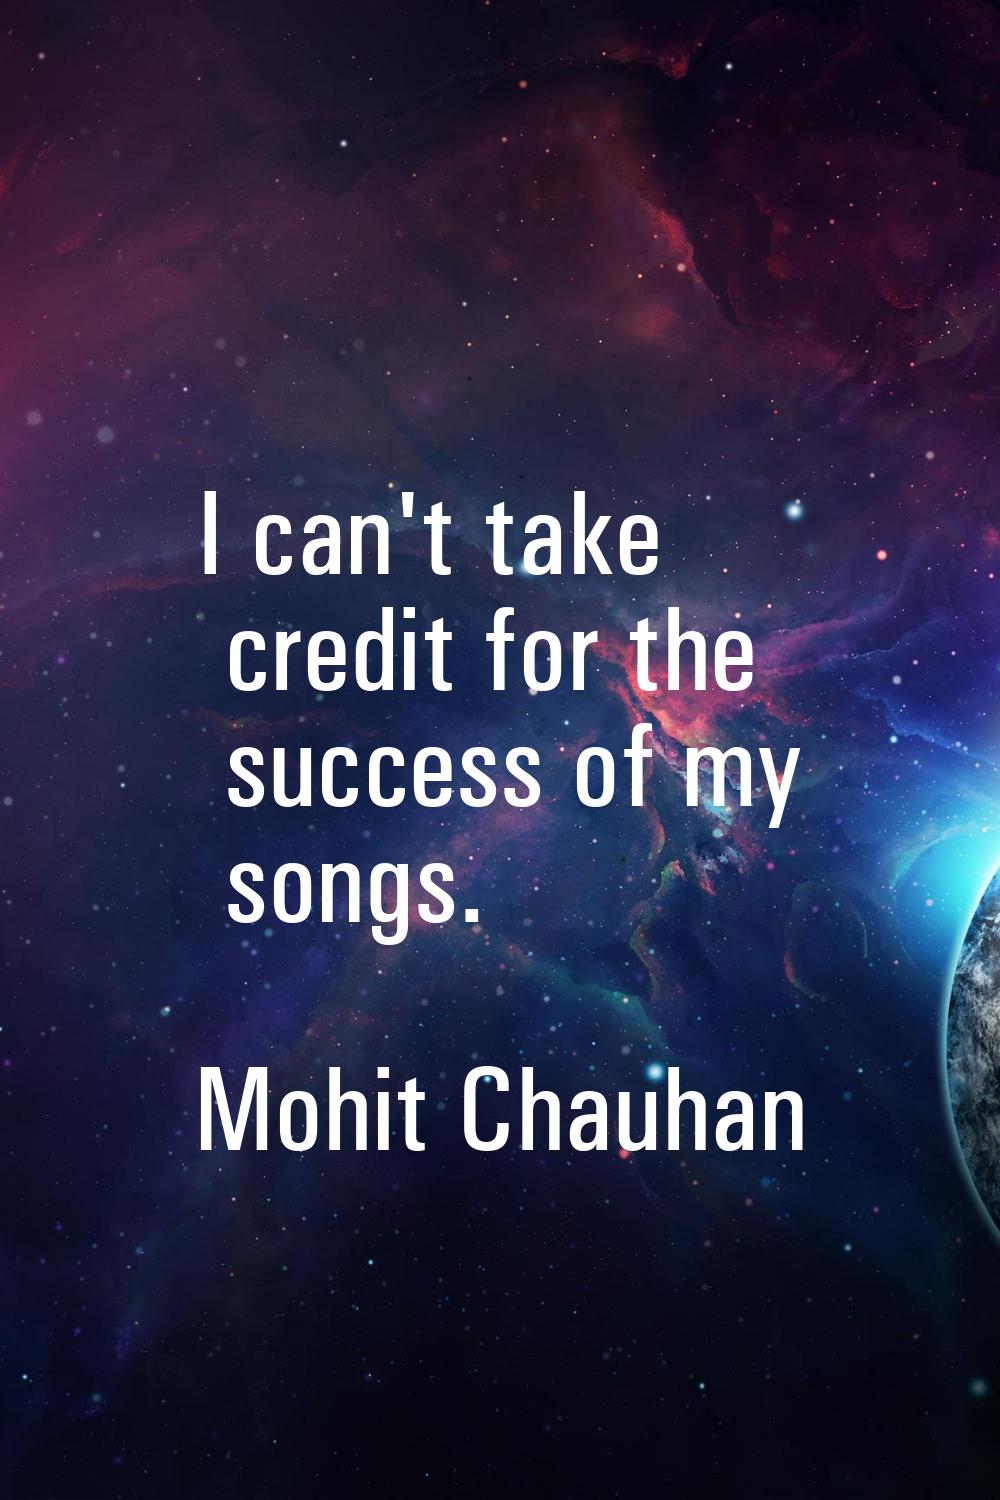 I can't take credit for the success of my songs.